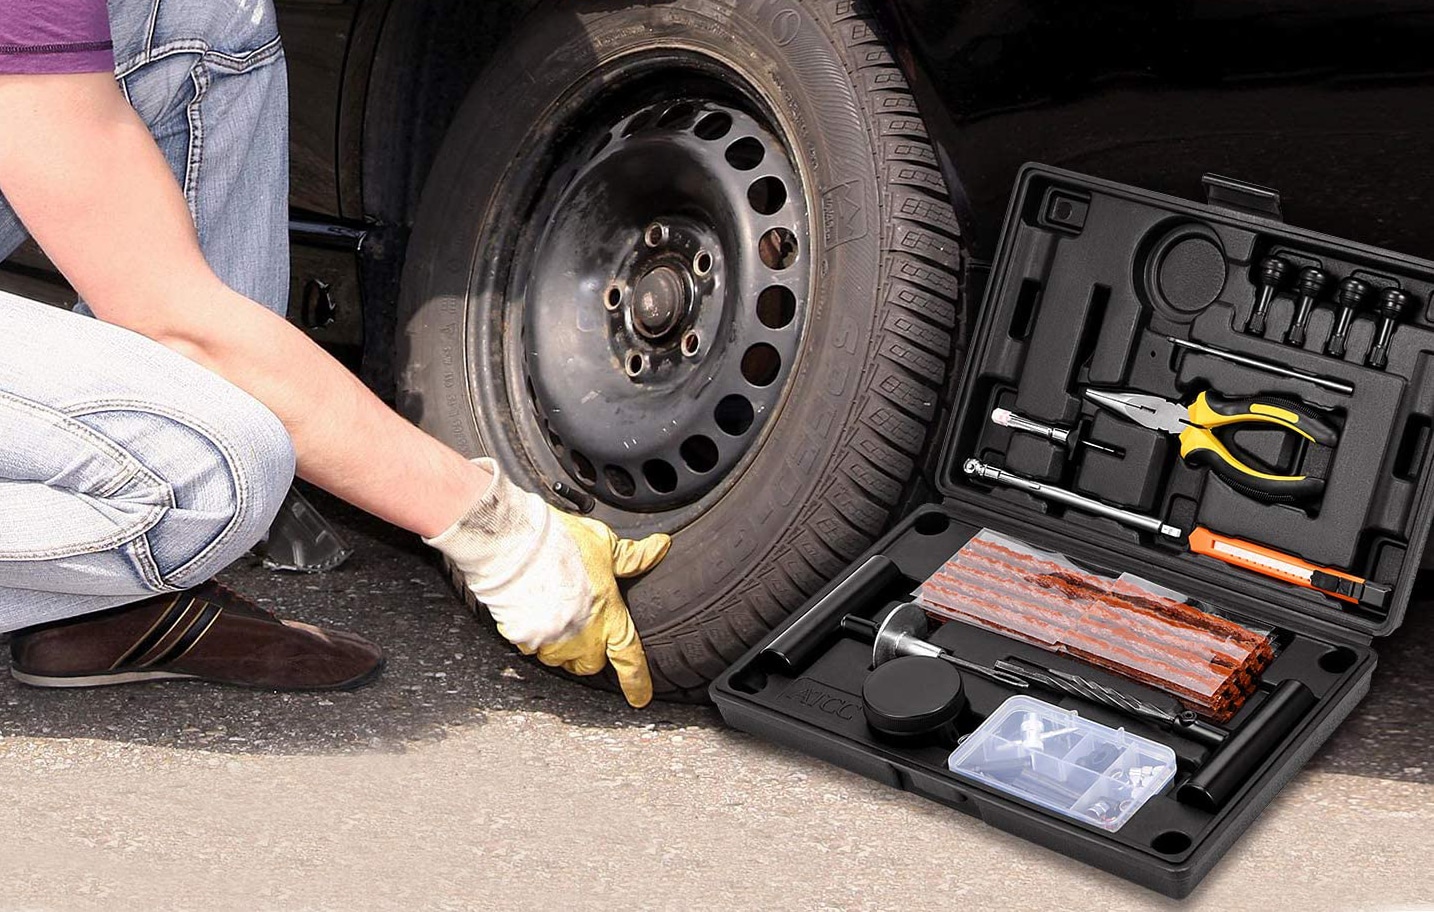 Are You Looking for Best Tire Repair Kits in 2022